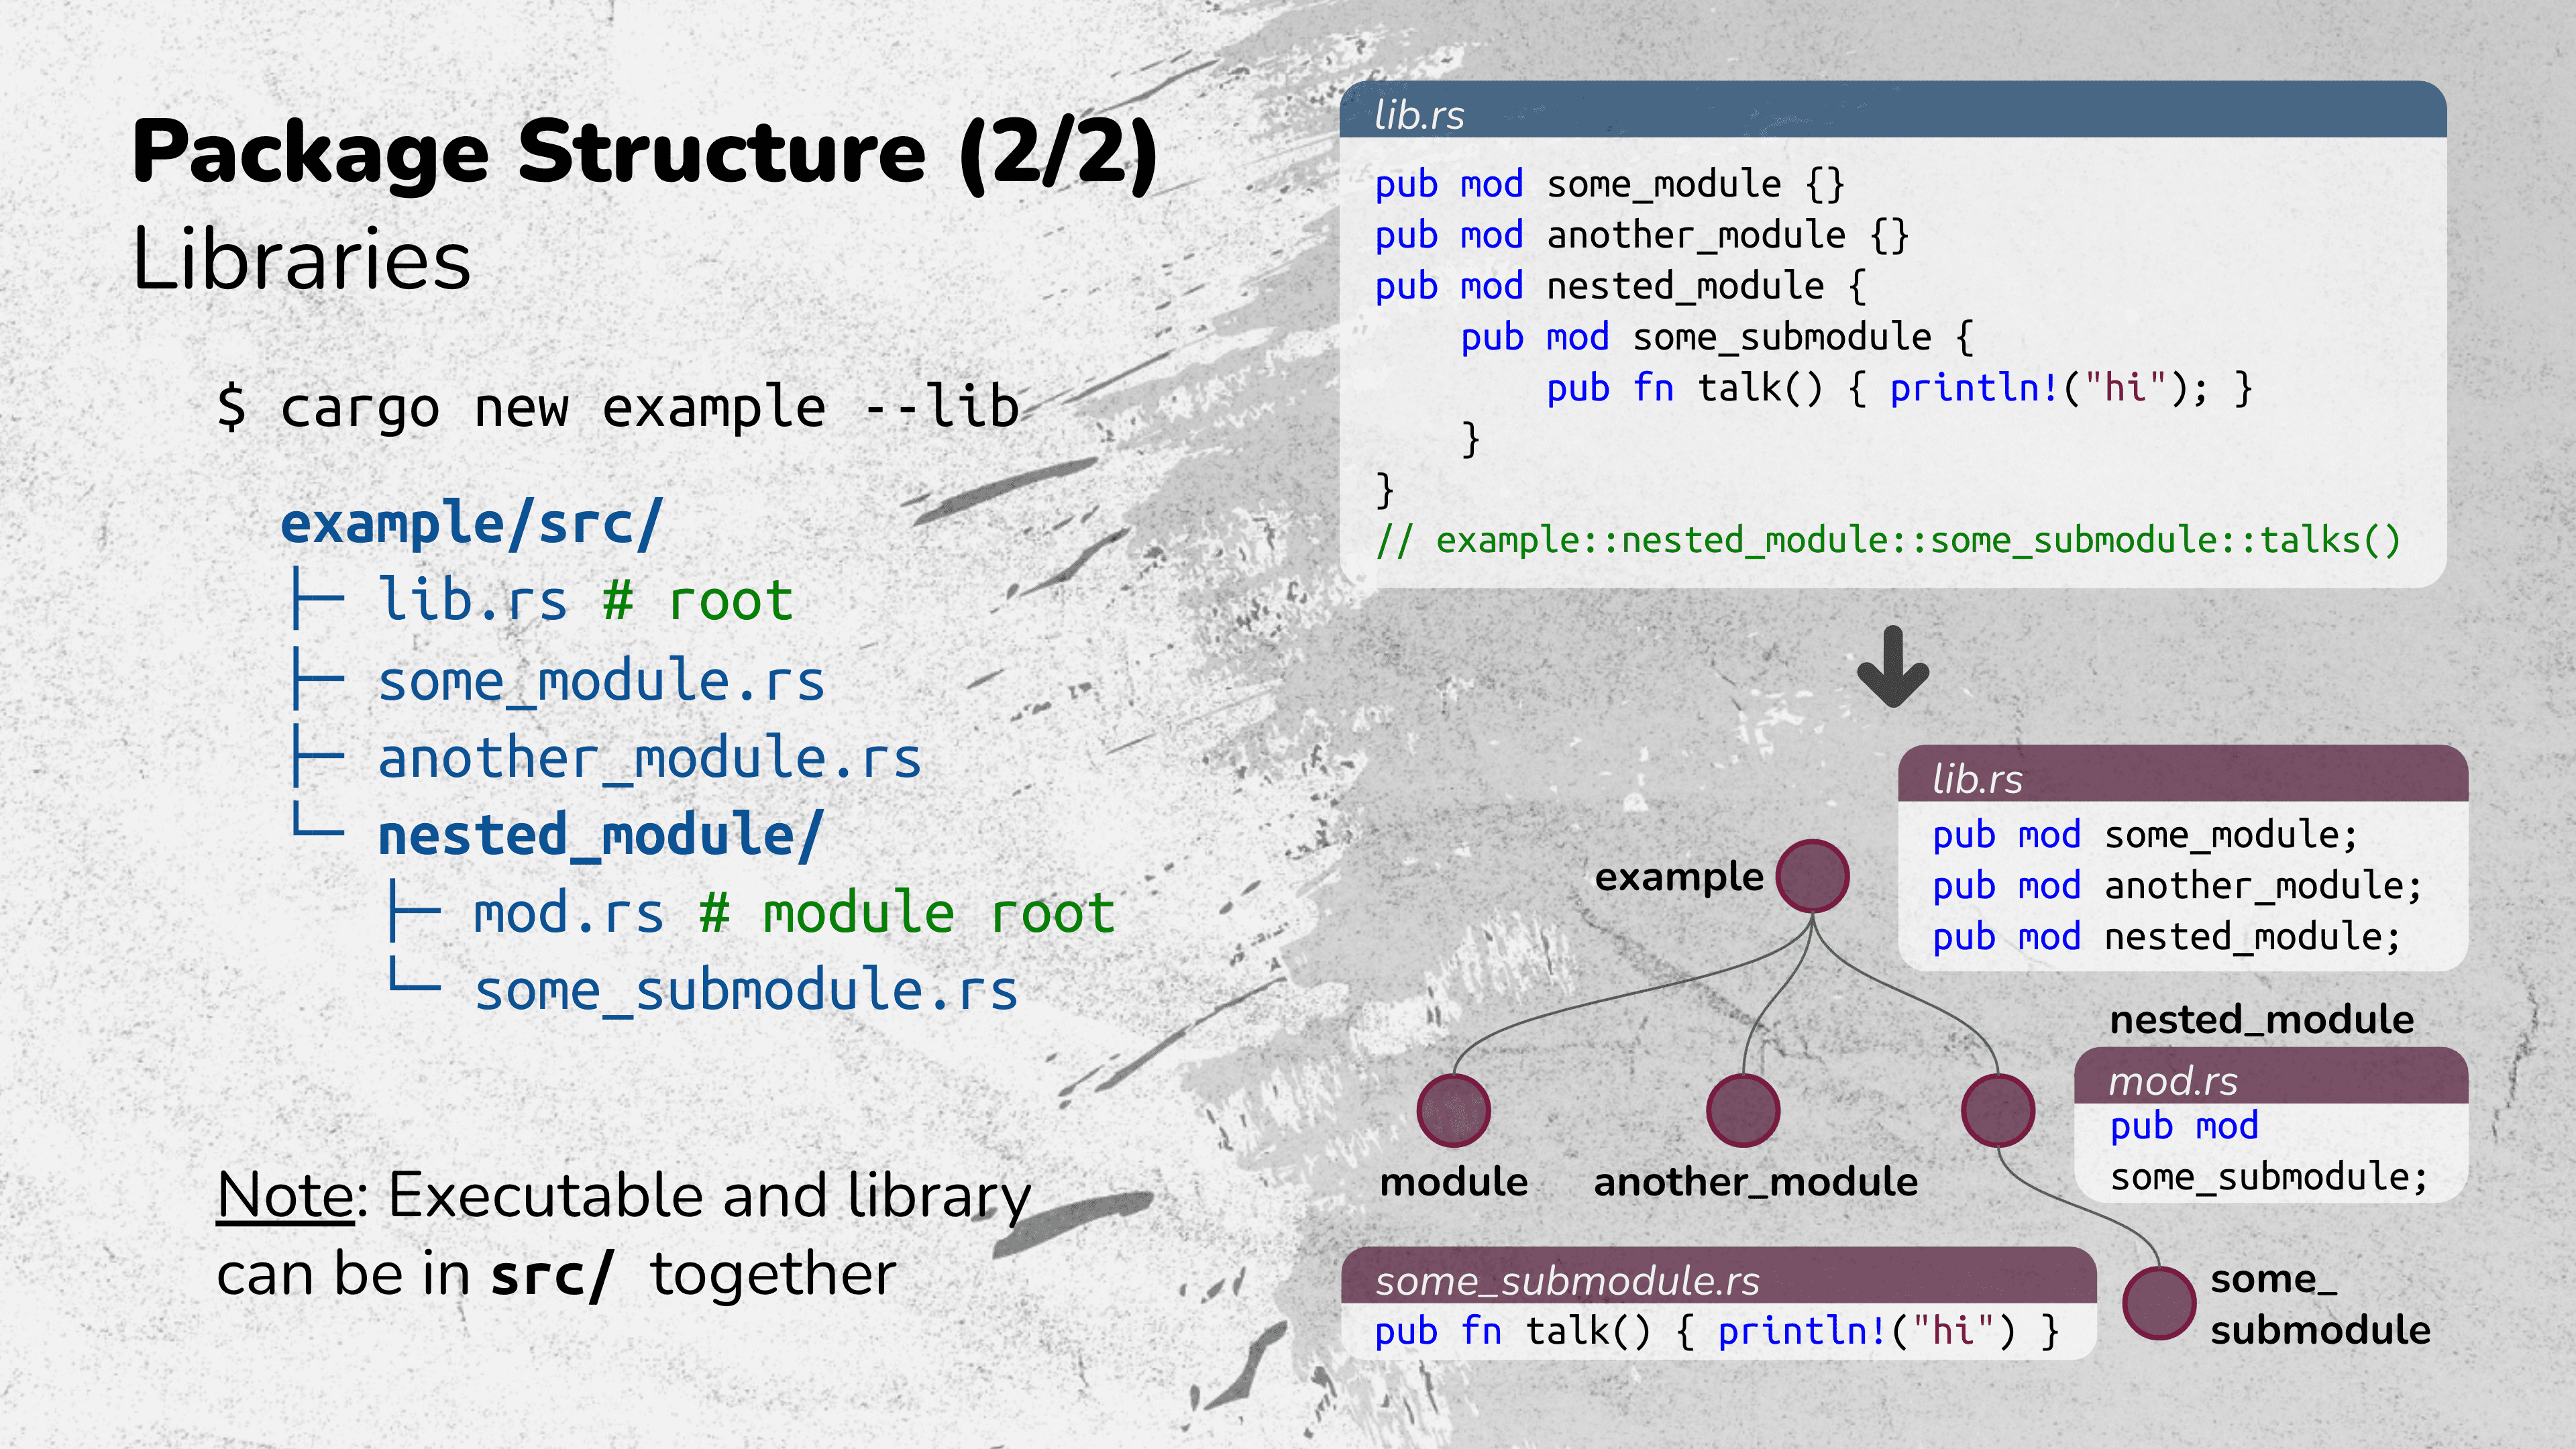 package-structure-libraries.png